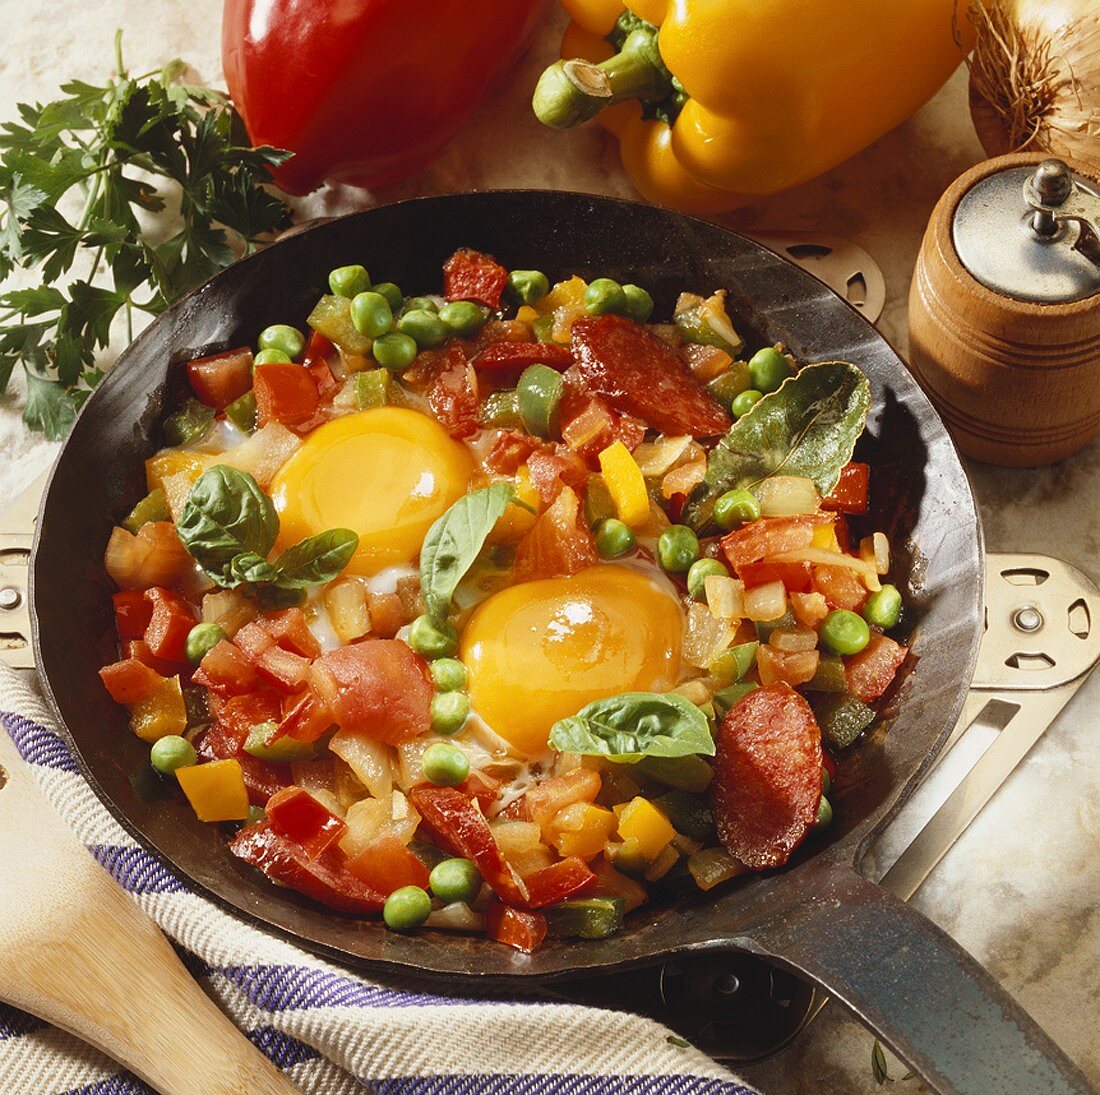 Fried eggs, vegetables and sausage in frying pan